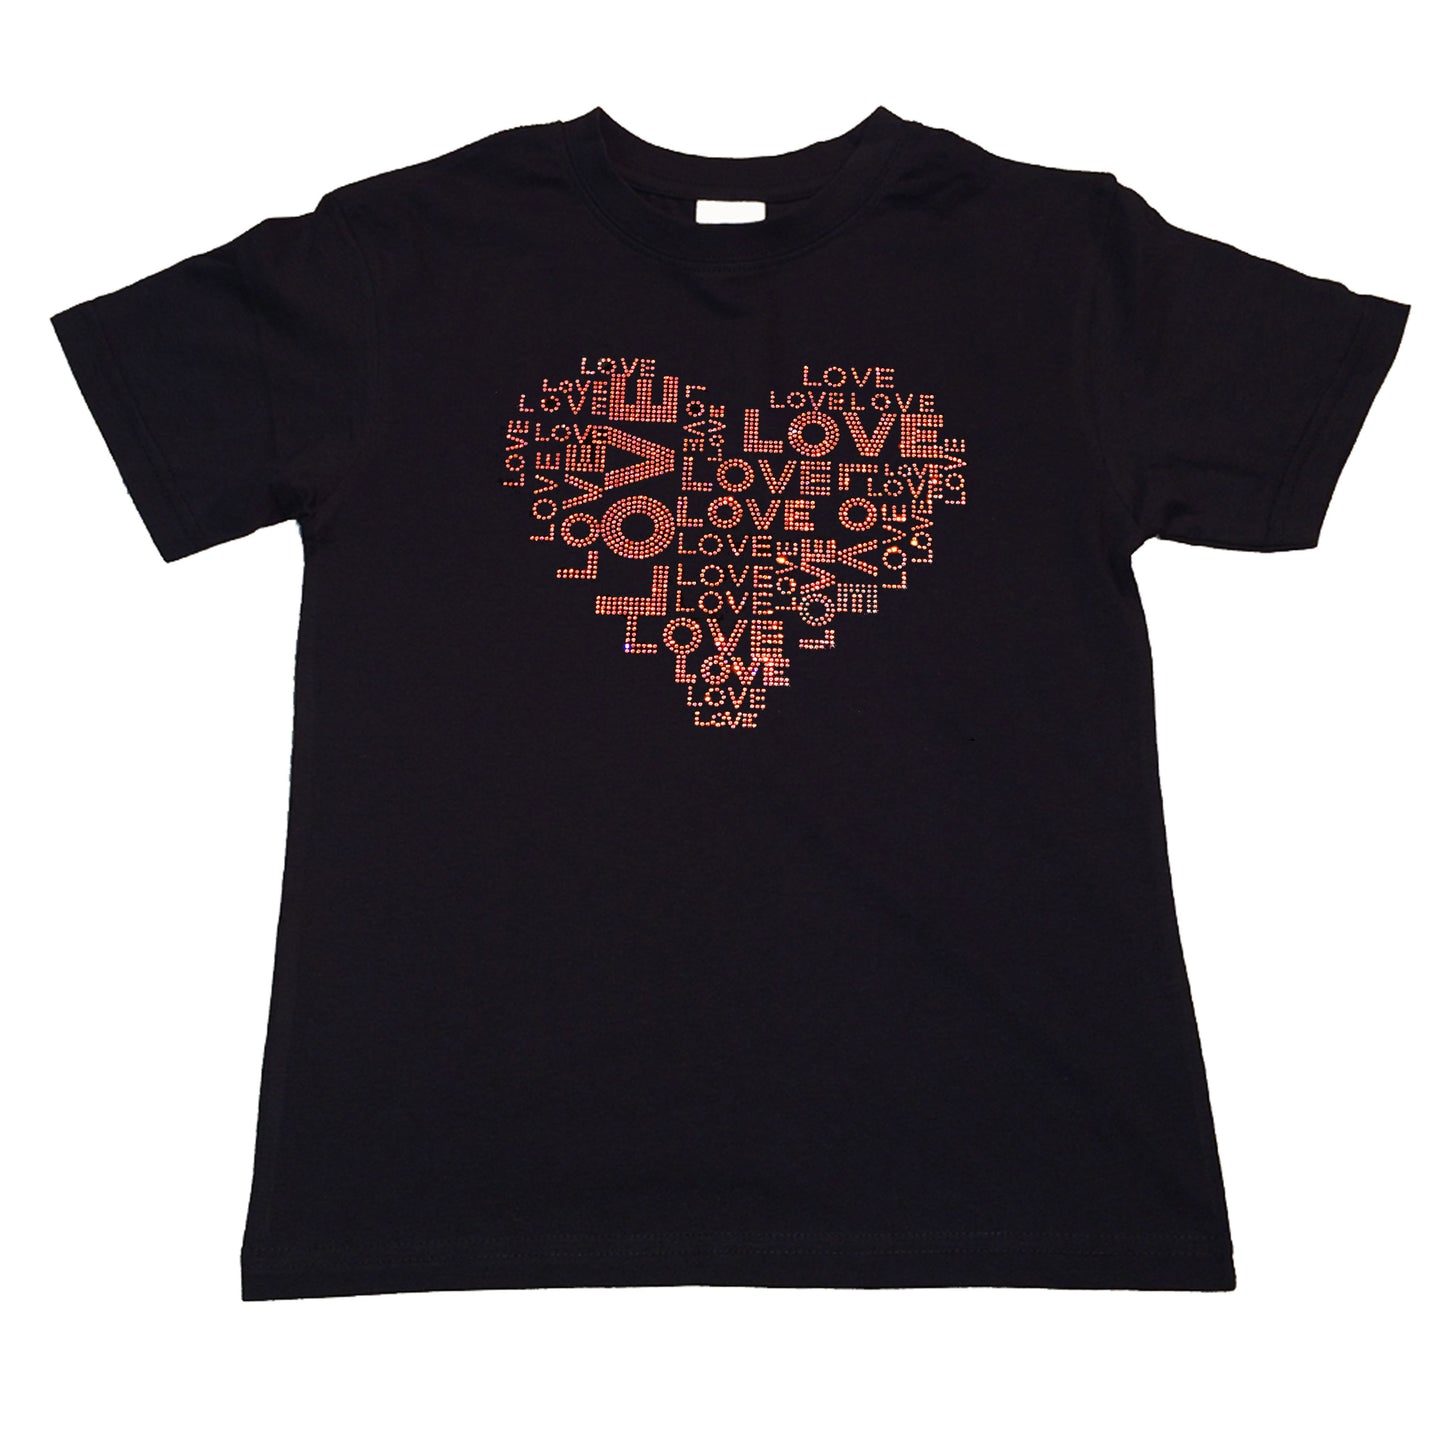 Girls Rhinestone T-Shirt " Love Collage in Pink AB " Kids Size 3 to 14 Available